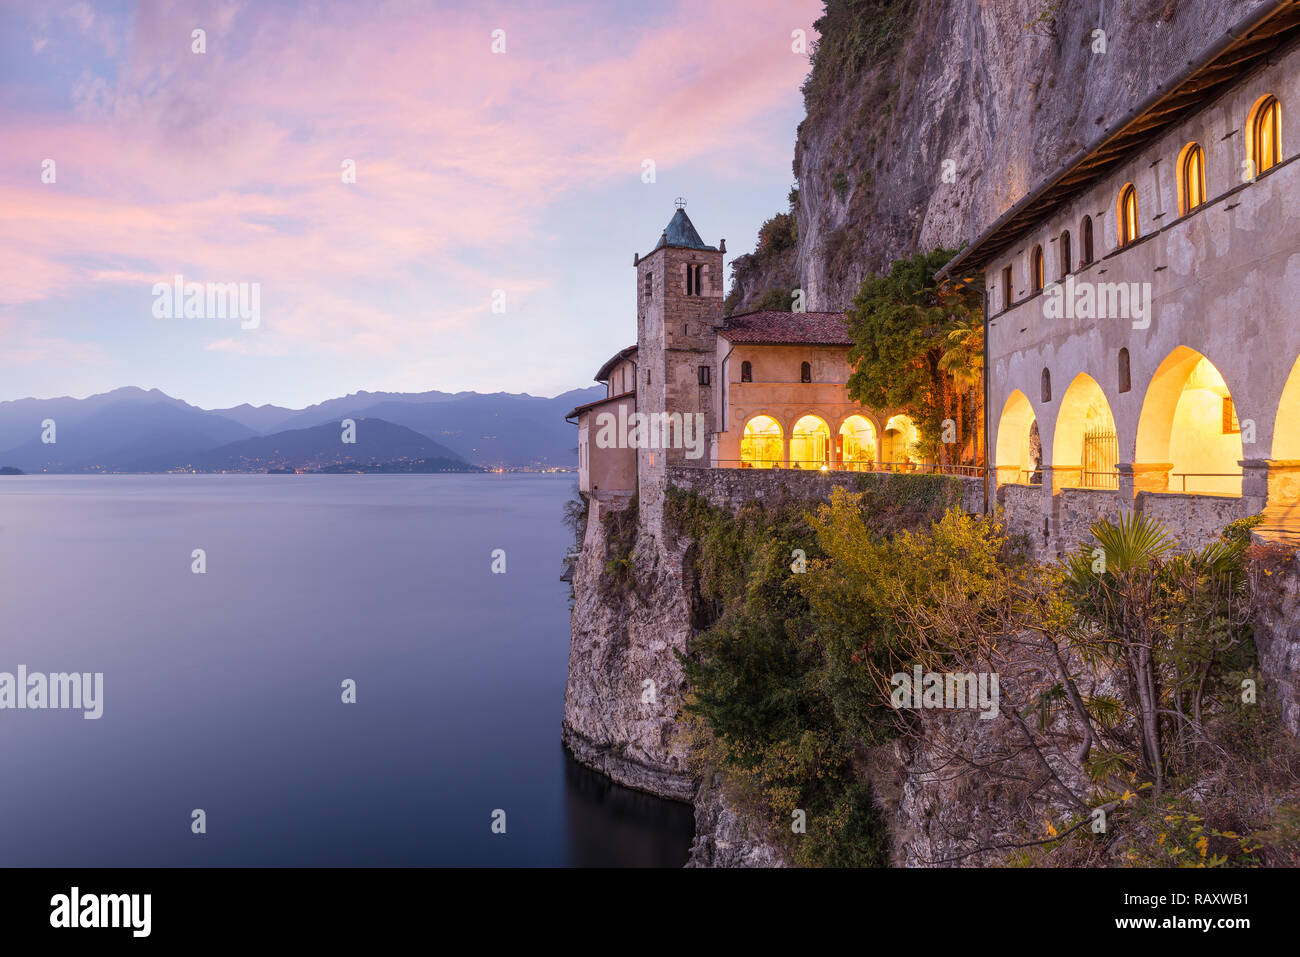 Ancient hermitage at sunset. Lake Maggiore, Italy Stock Photo